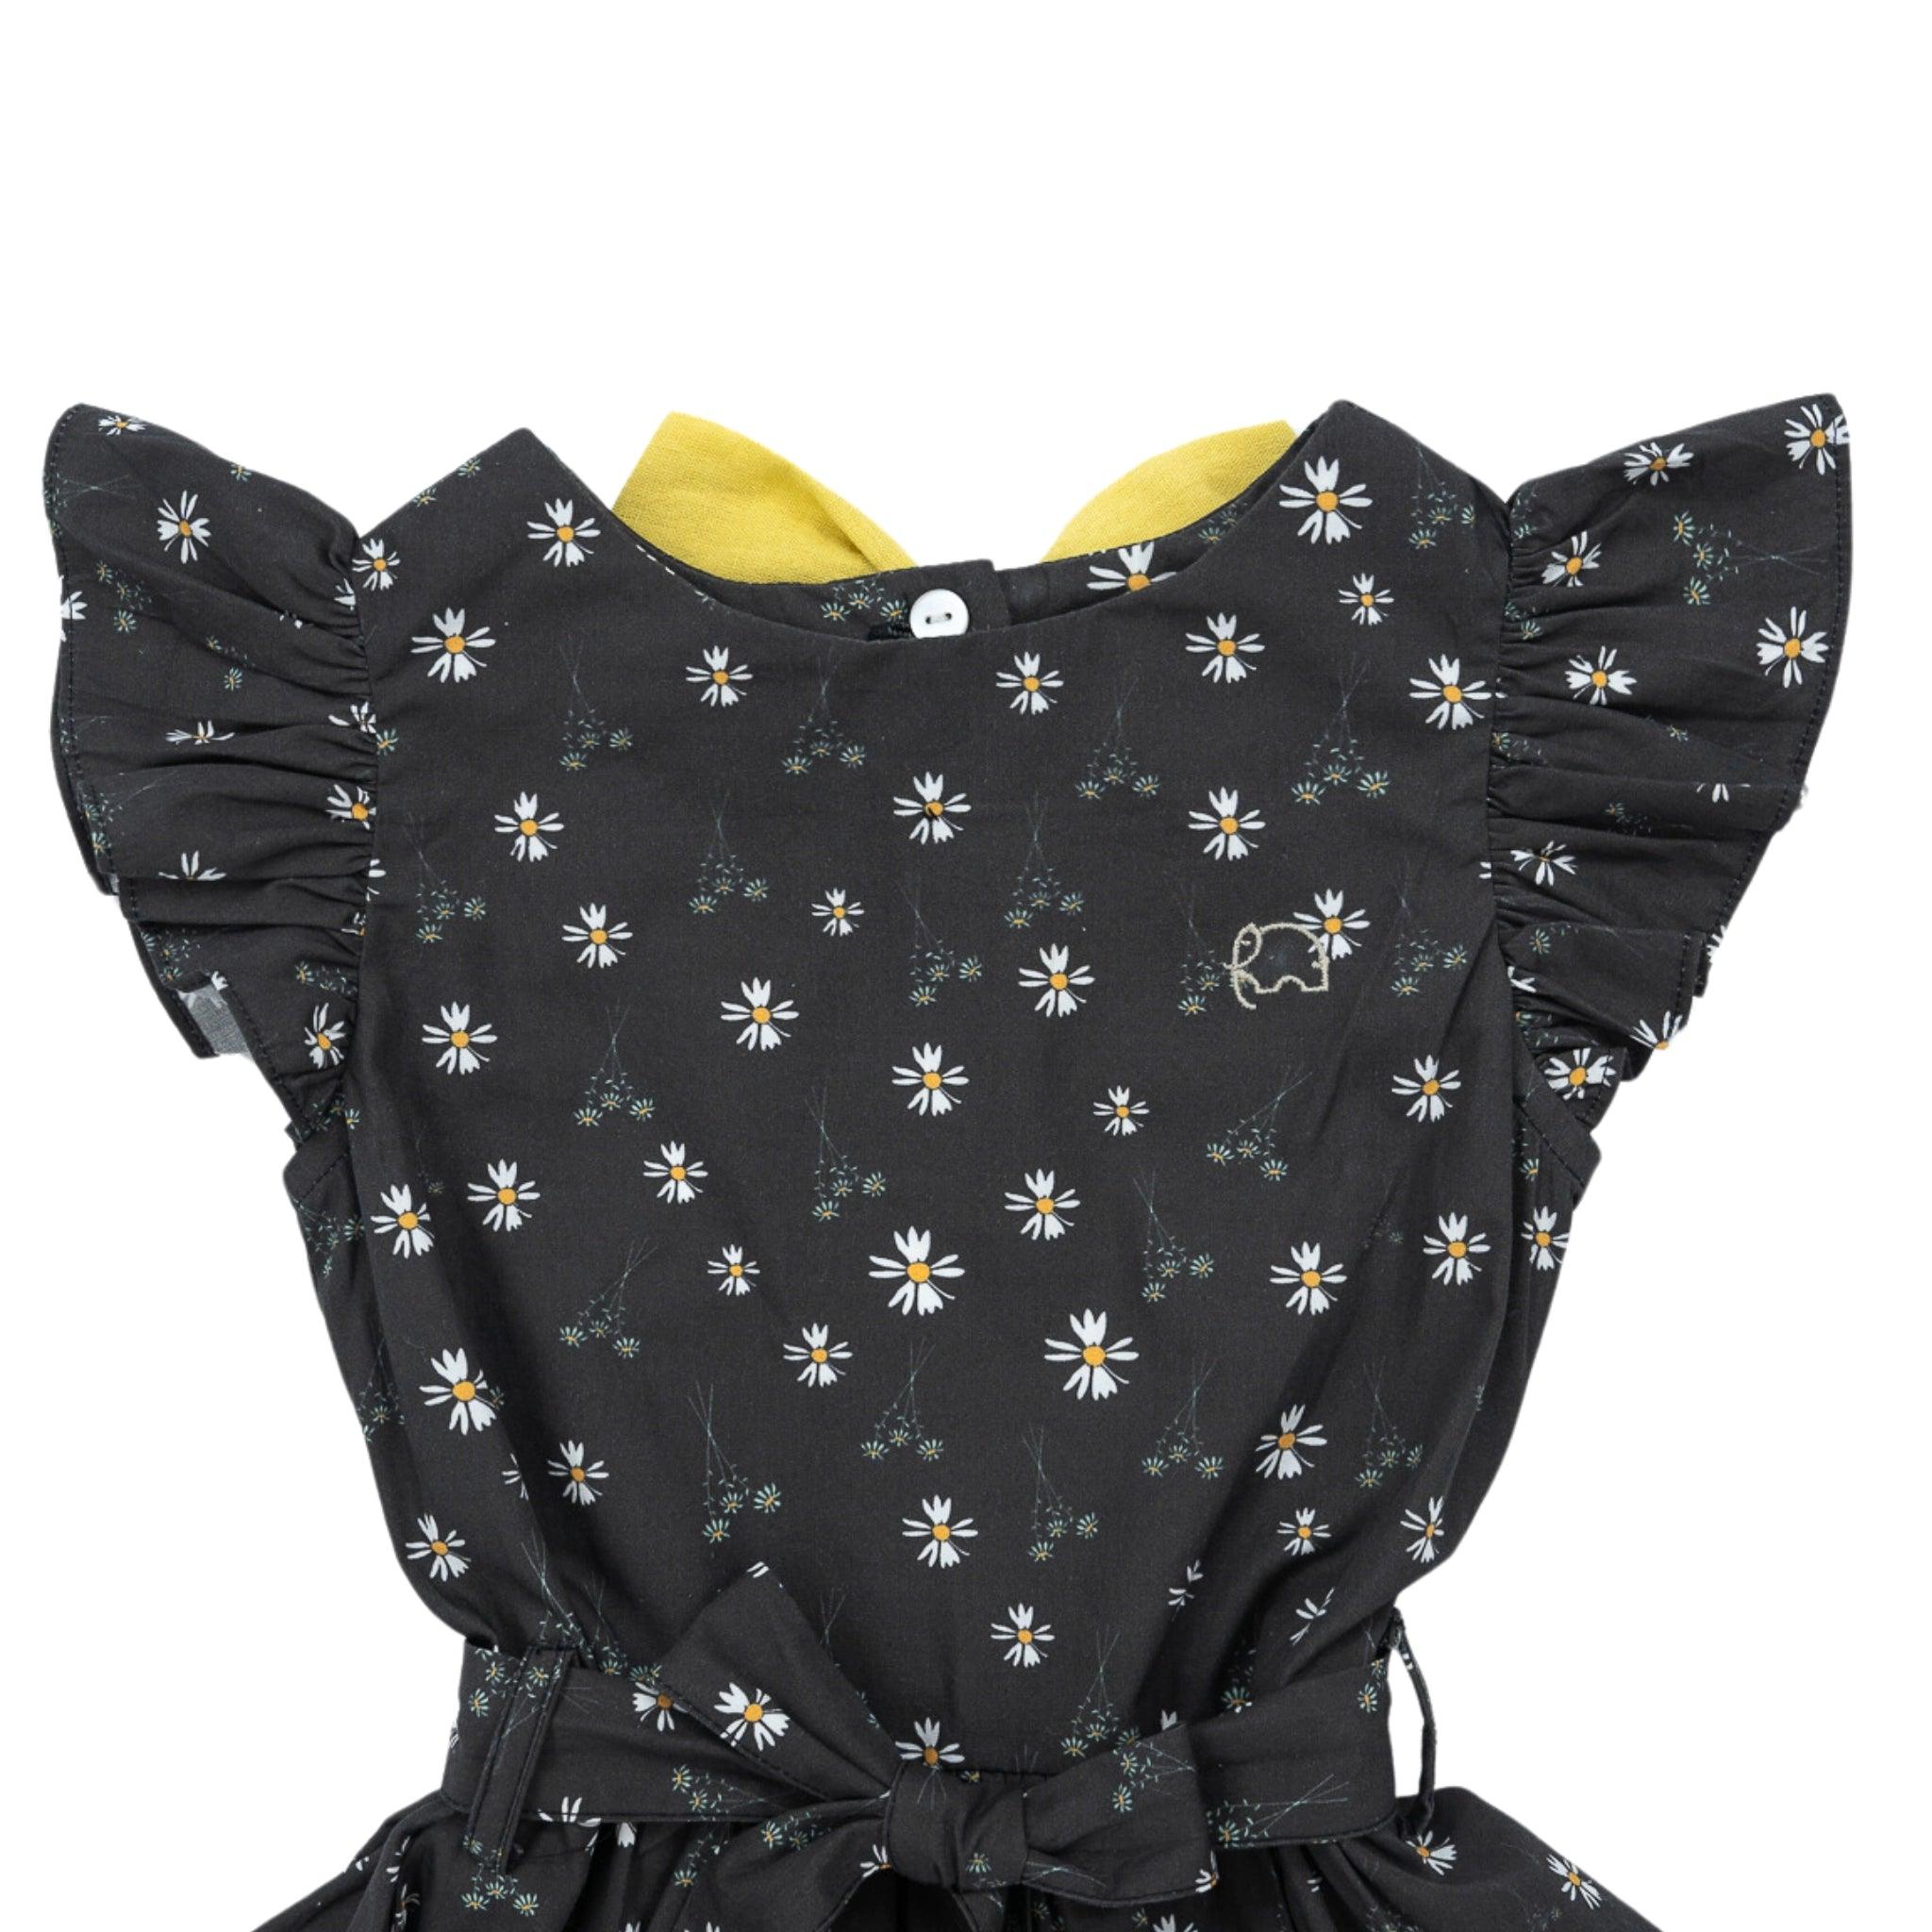 Children's elegant Petite Blossom Black Cotton Dress with a floral pattern and ruffled sleeves, featuring a yellow collar and a front button by Karee.